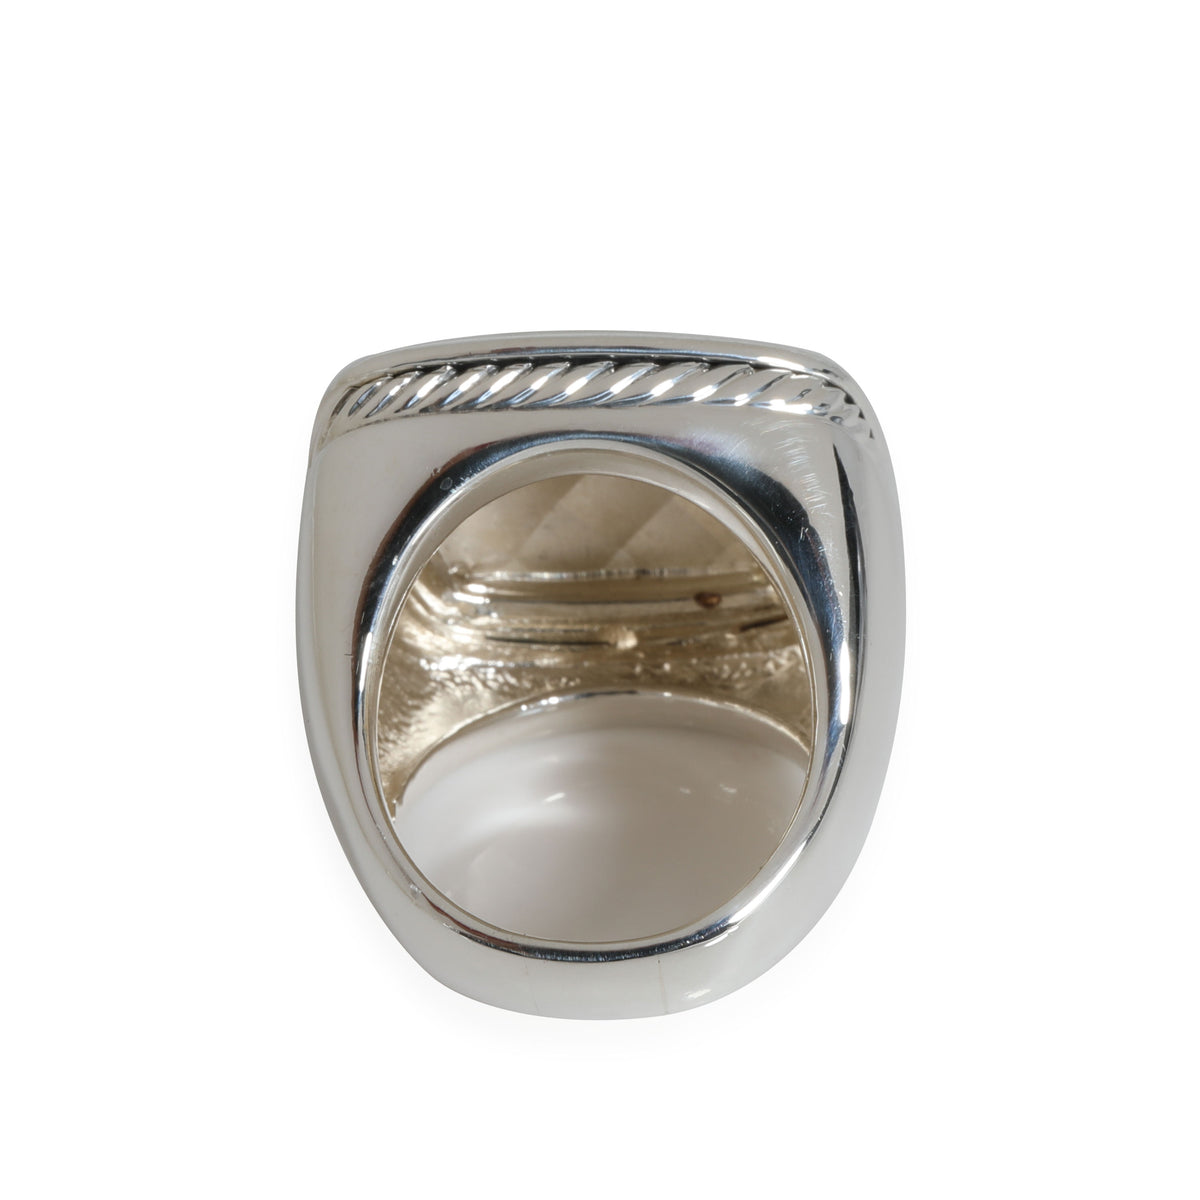 David Yurman Albion Faceted Dome Ring in 18kt Gold/Sterling